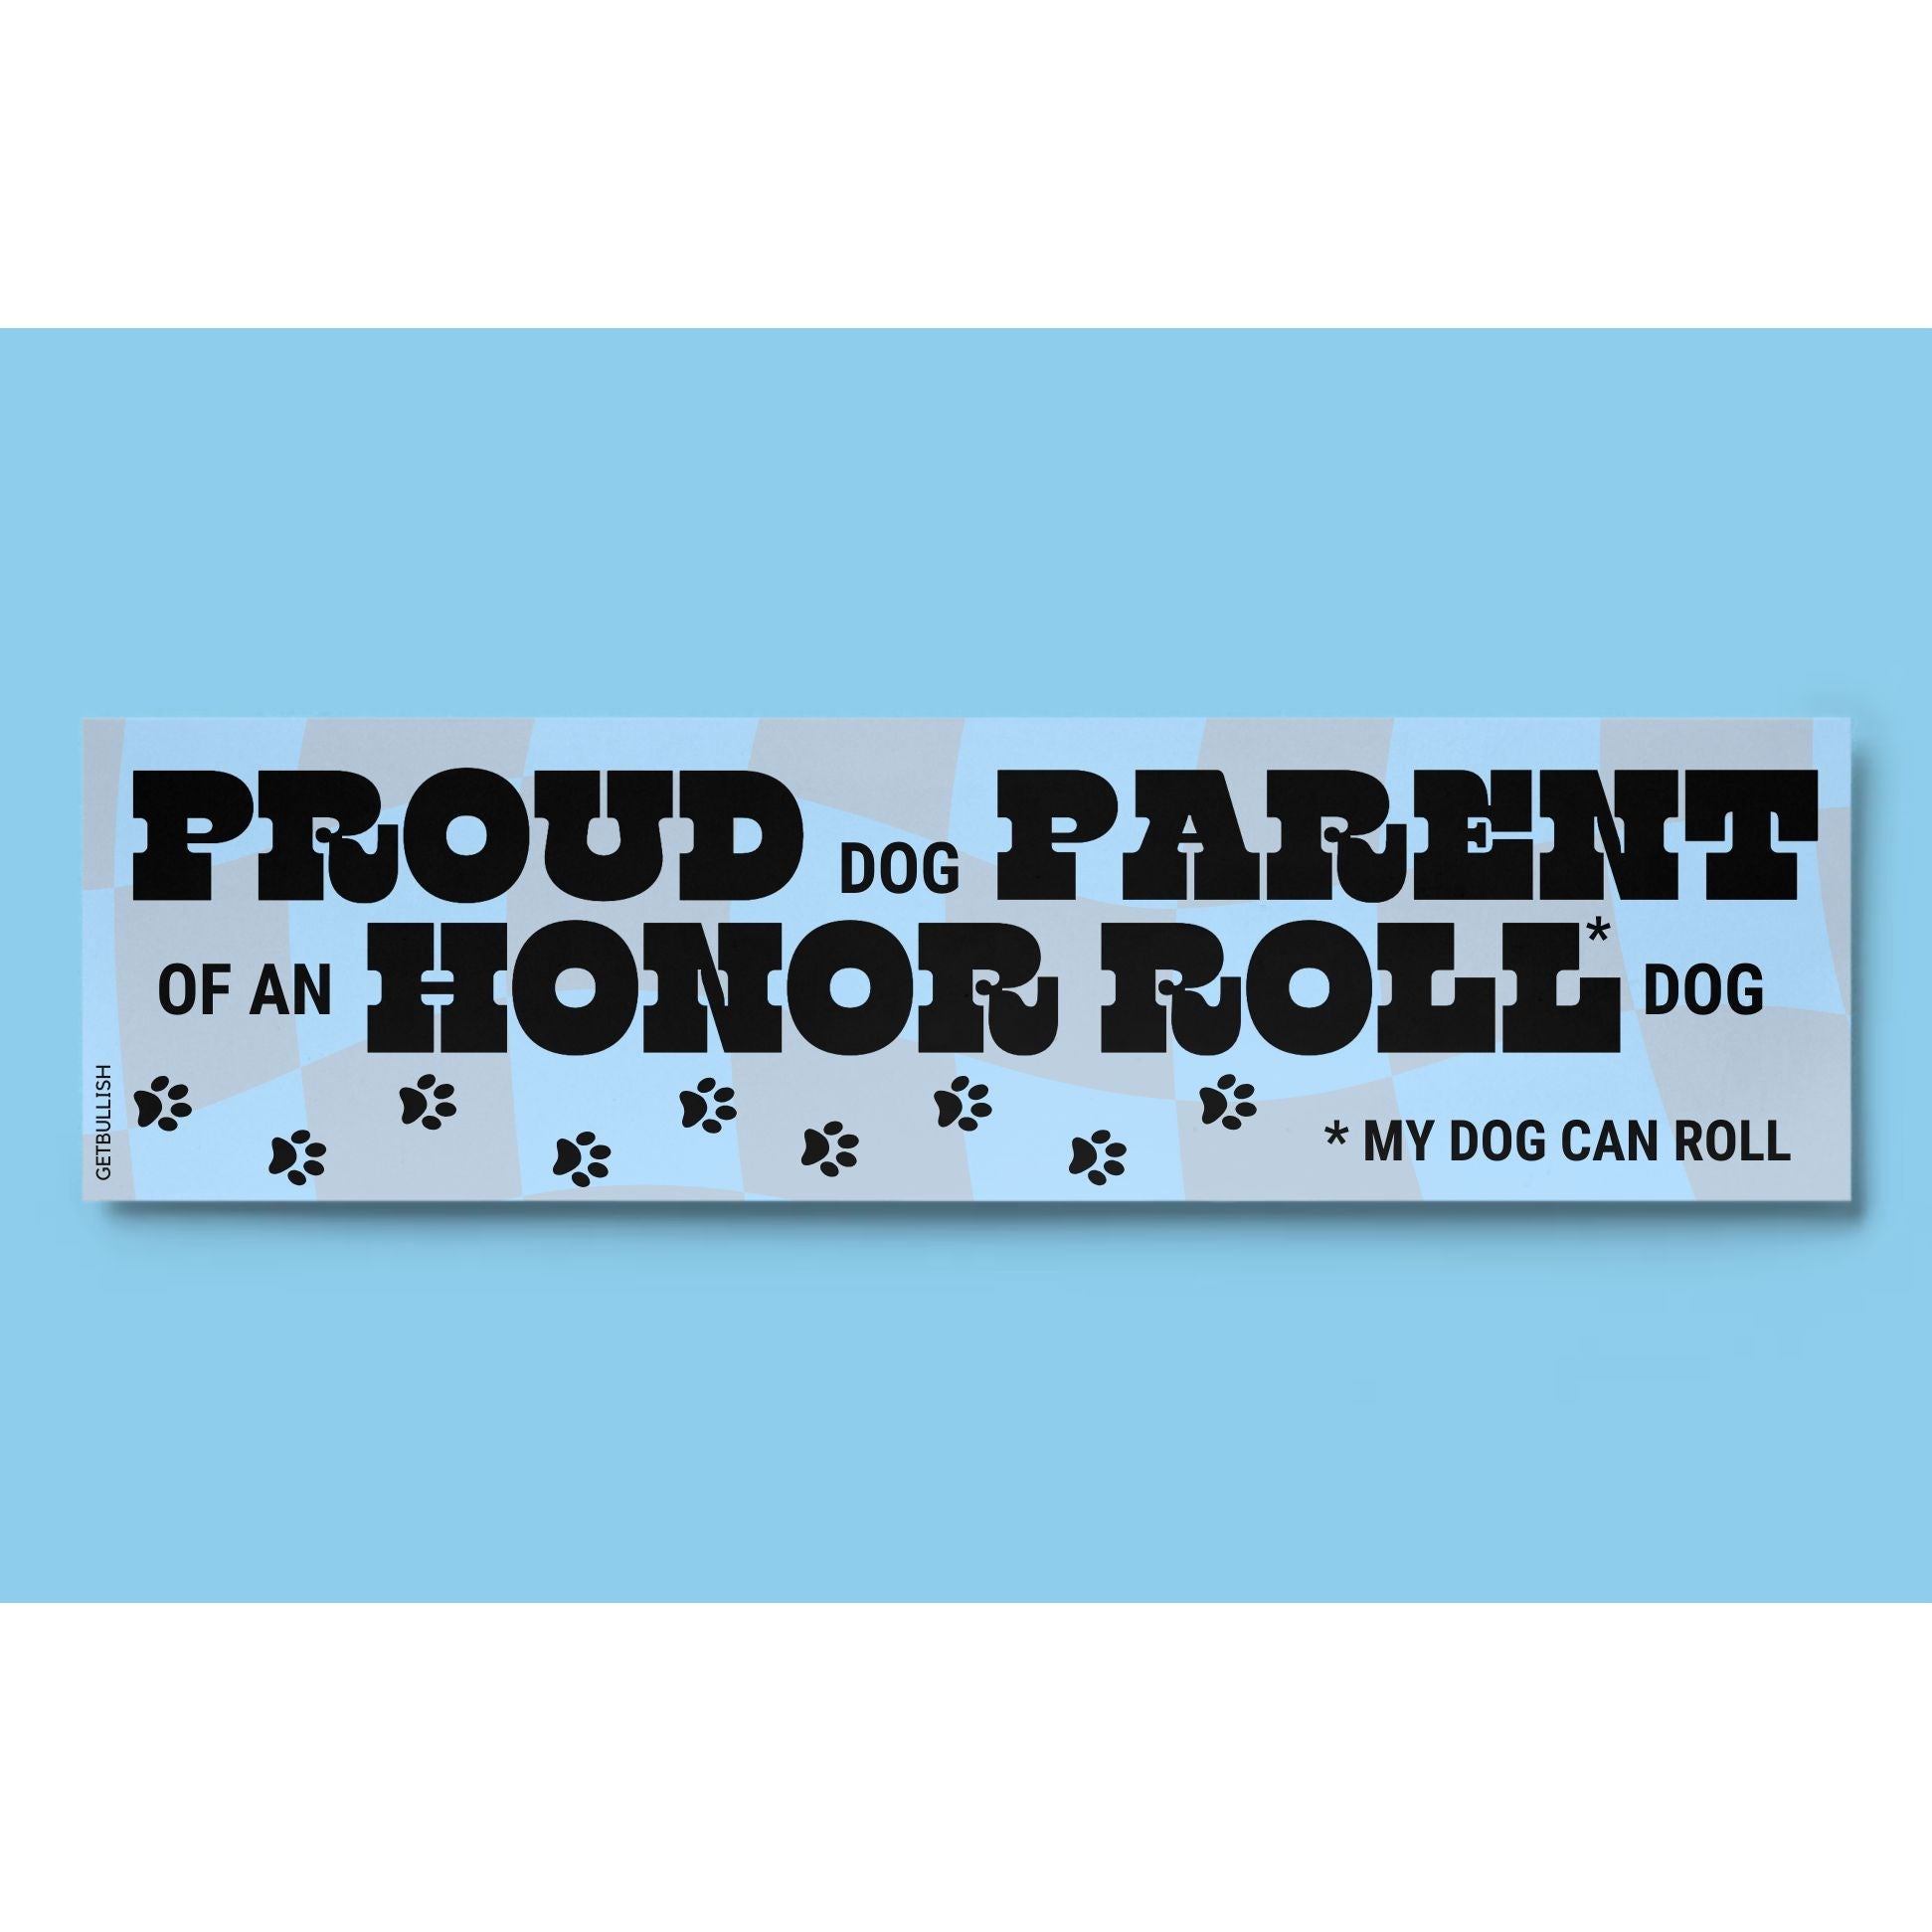 Proud Dog Parent of an Honor Roll Doll (My Dog Can Roll) Bumper Sticker